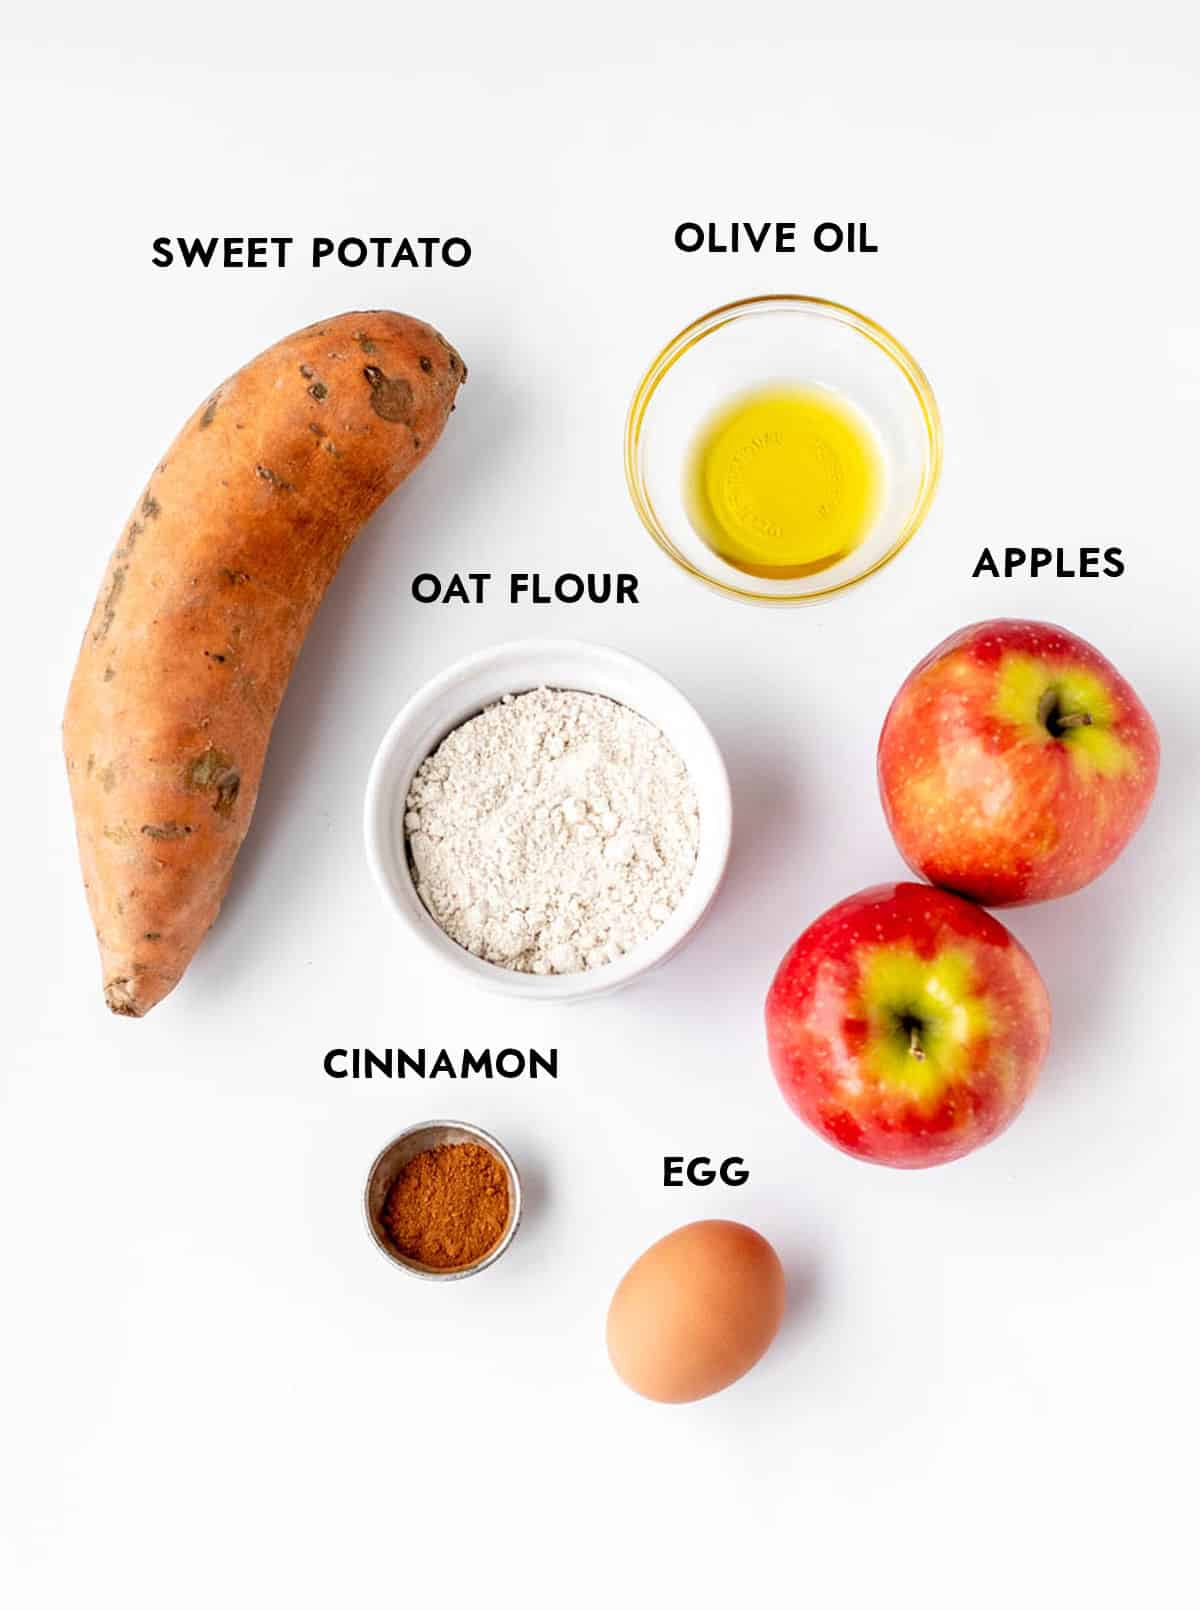 Ingredients required to make the mashed sweet potato fritters recipe.